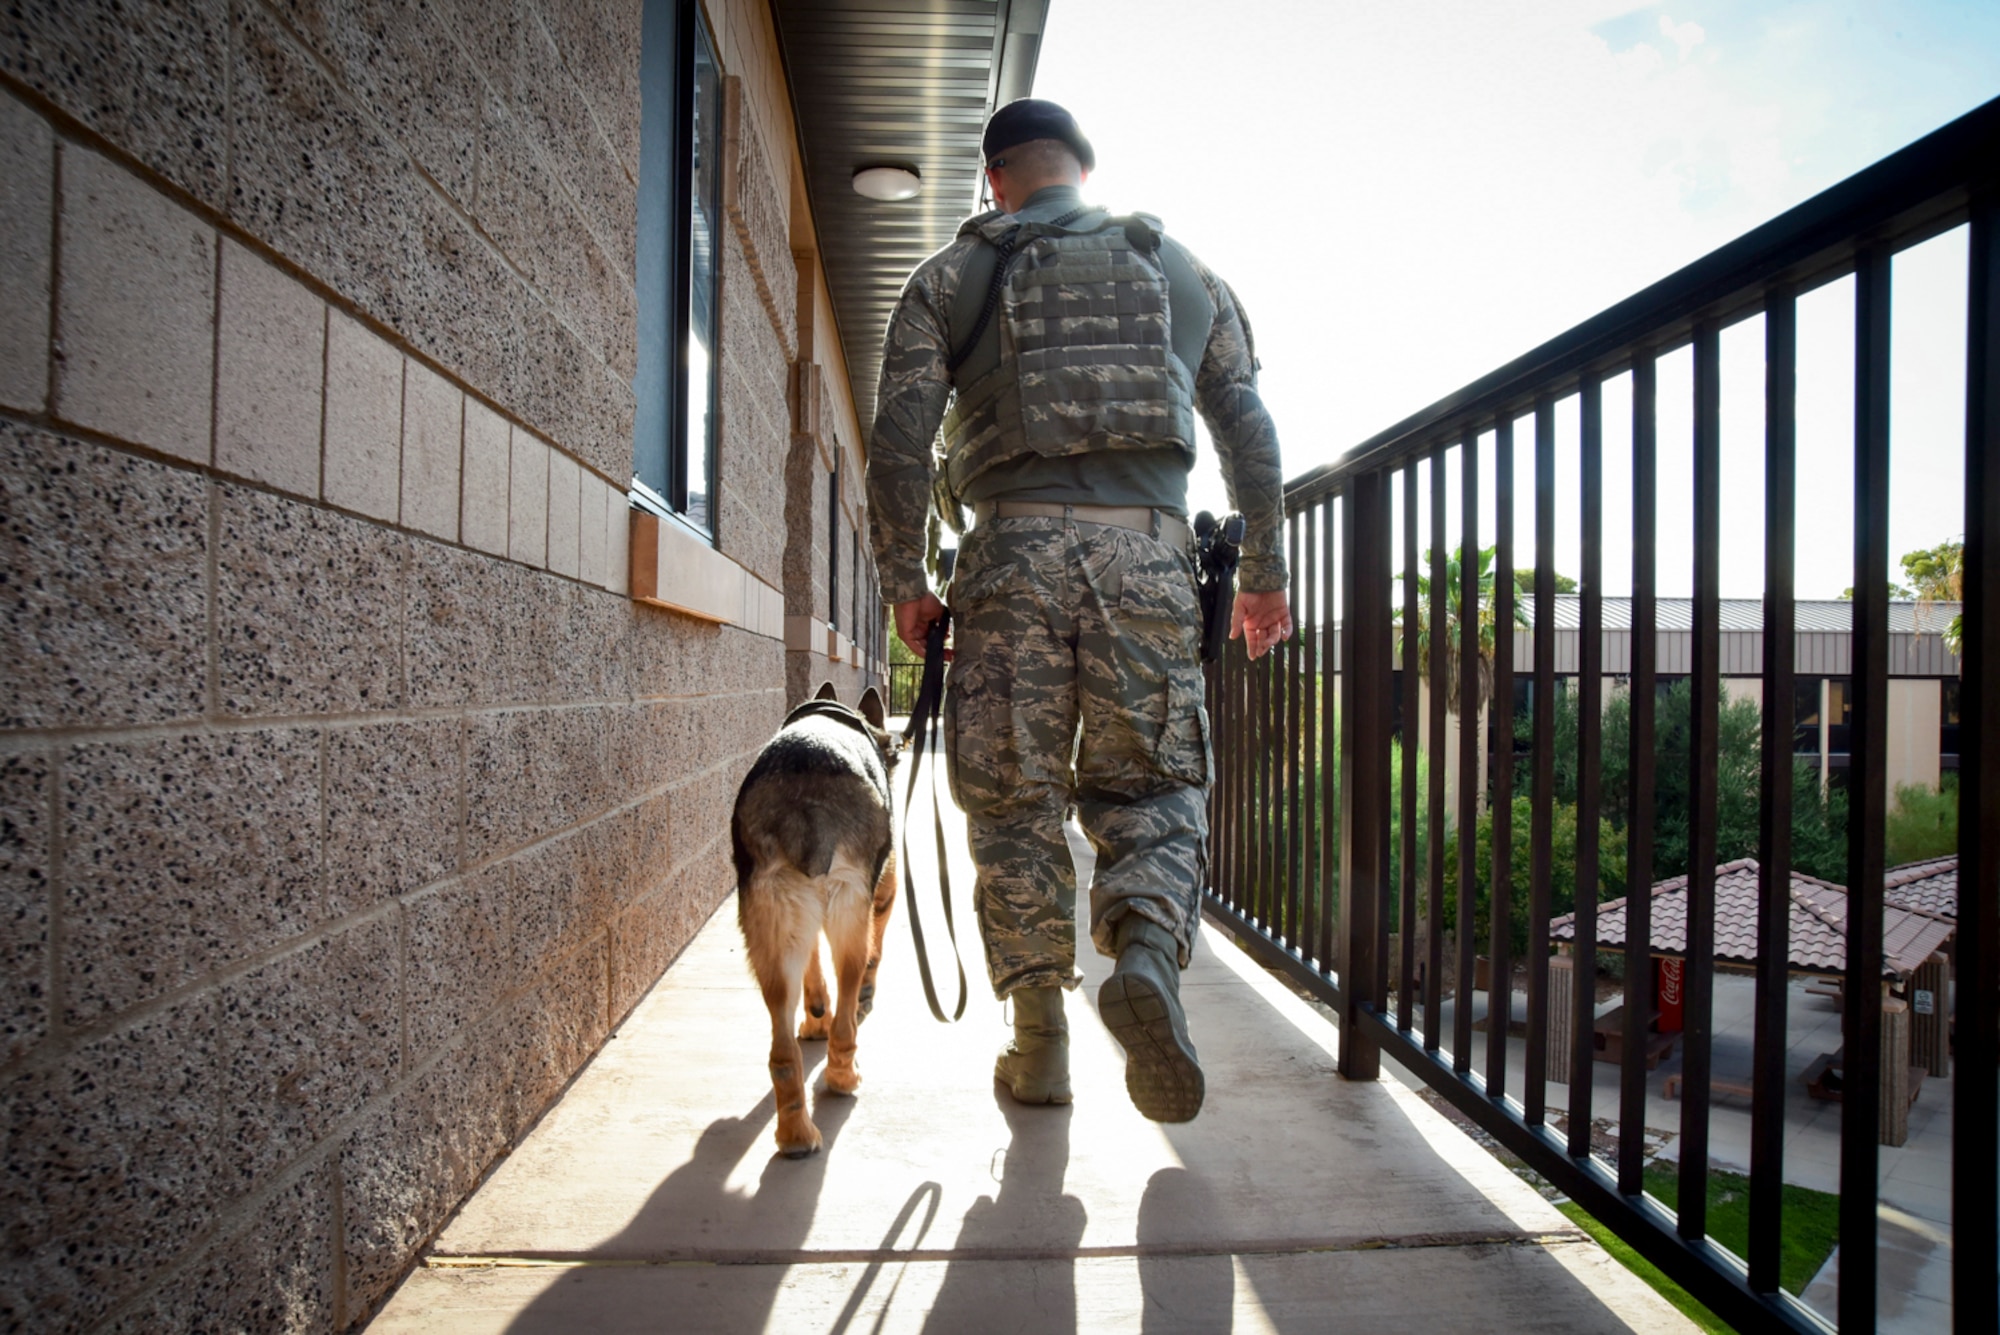 Senior Airman Ryne Wilson, 99th Security Forces Squadron military working dog handler, and MWD Habo patrol the dorms at Nellis Air Force Base, Nevada, August 7, 2017. Wilson and Habo perform dorm patrols to ensure the safety and security of the Airmen living there. (U.S. Air Force photo by Airman 1st Class Andrew D. Sarver/Released)